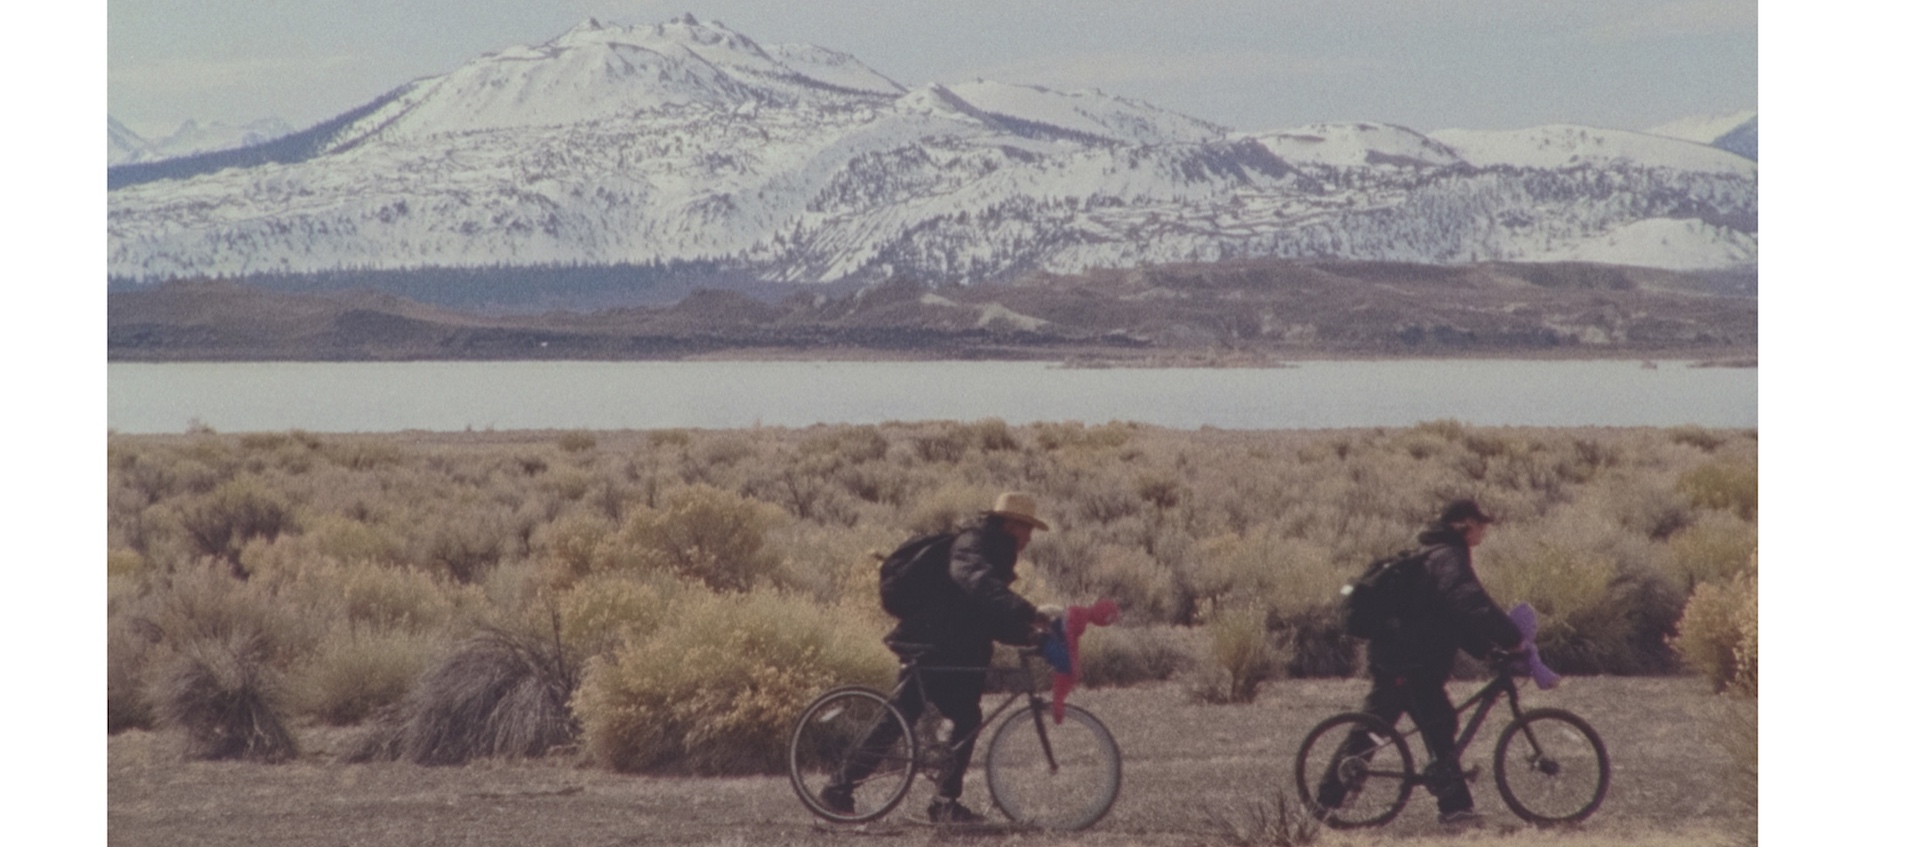 Two teenage boys ride bikes against a gray mountain-filled background in an image from artist Stanya Kahn's short film No Go Backs